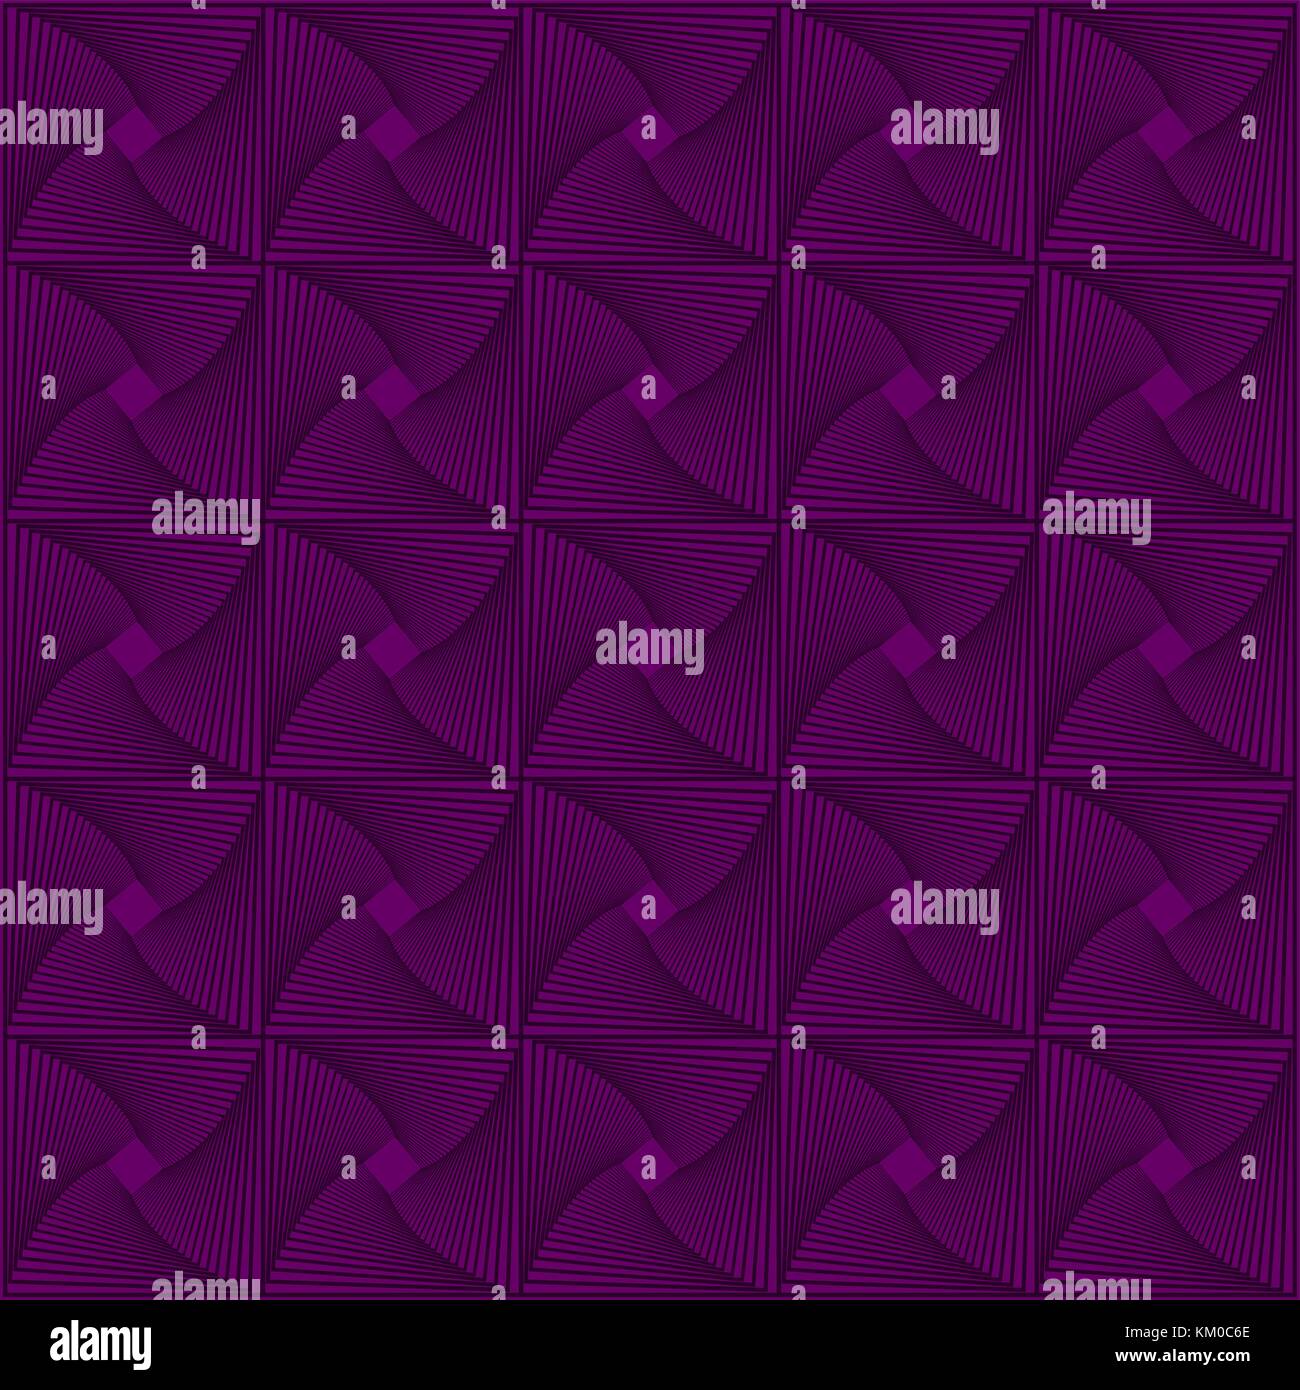 Dark purple abstract back ground of squares Stock Vector